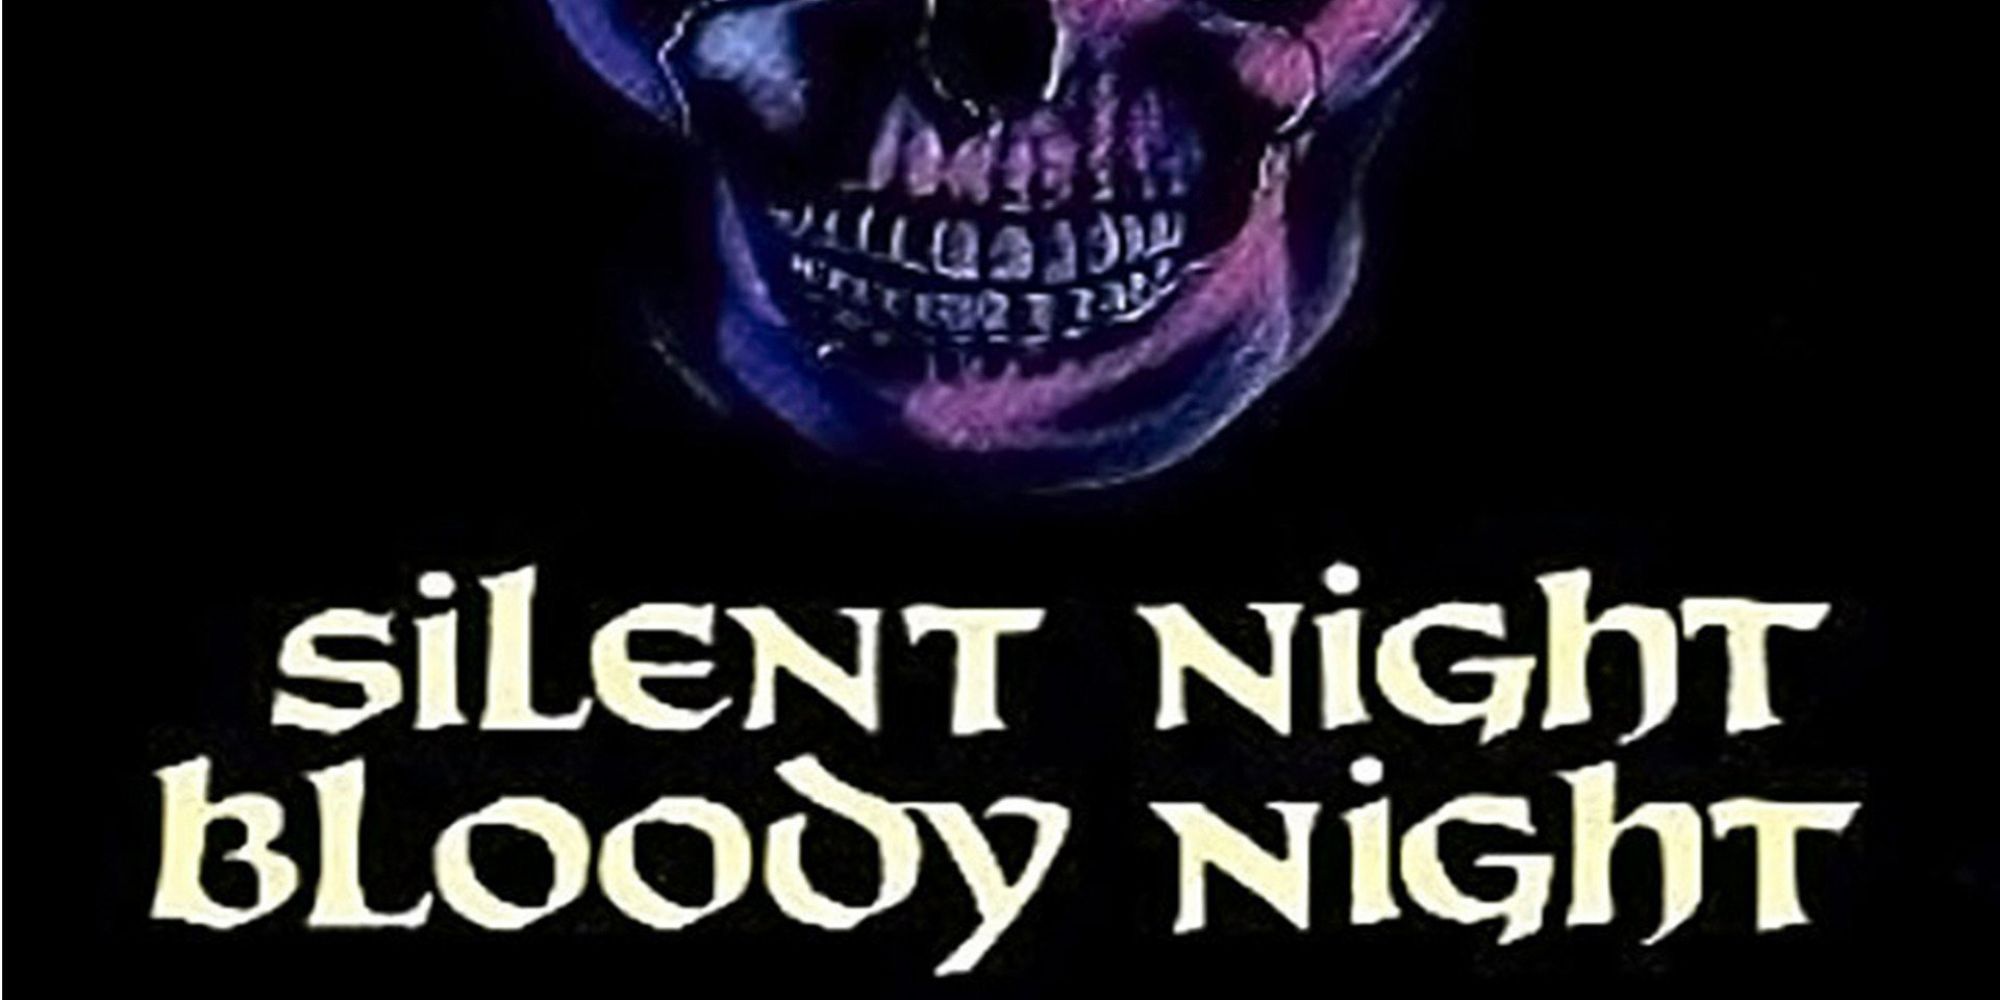 The theatrical poster for Silent Night, Bloody Night featuring a skull